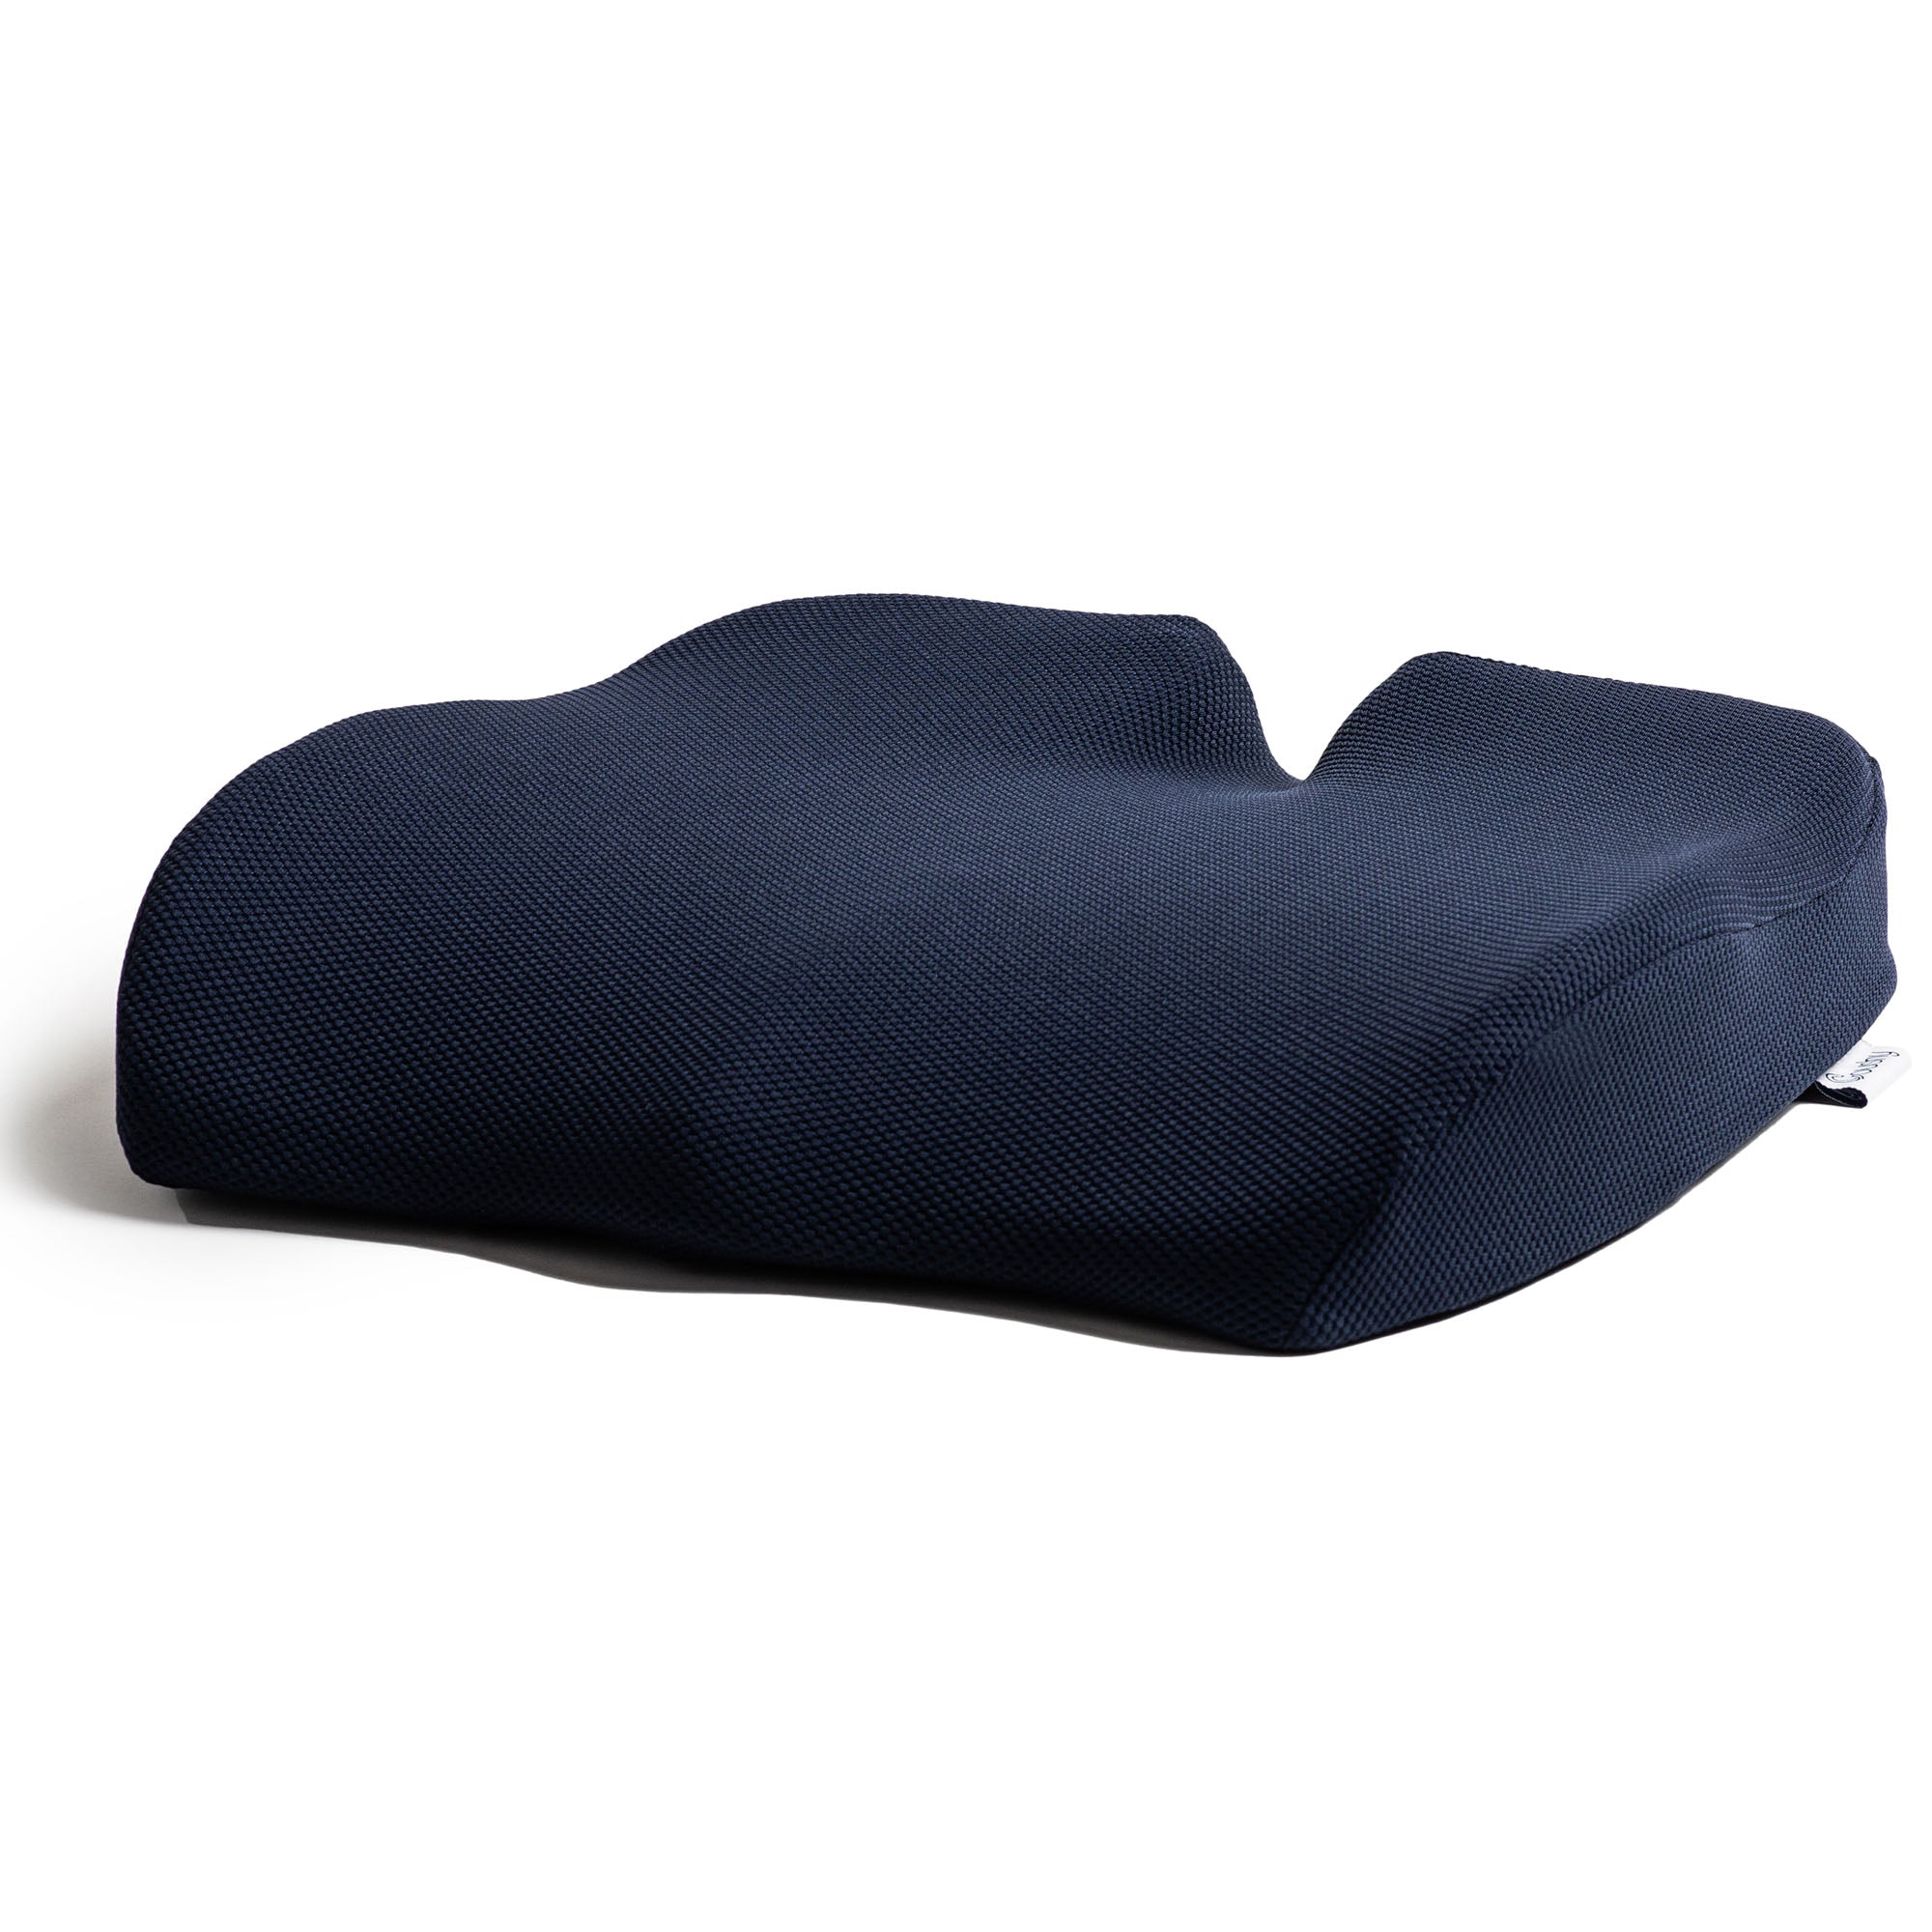 Cushion Lift Hips Up Seat Cushion Orthopedic Memory Foam Support Cushion  For Sciatica, Tailbone And Hip Pain Relief Of Pre